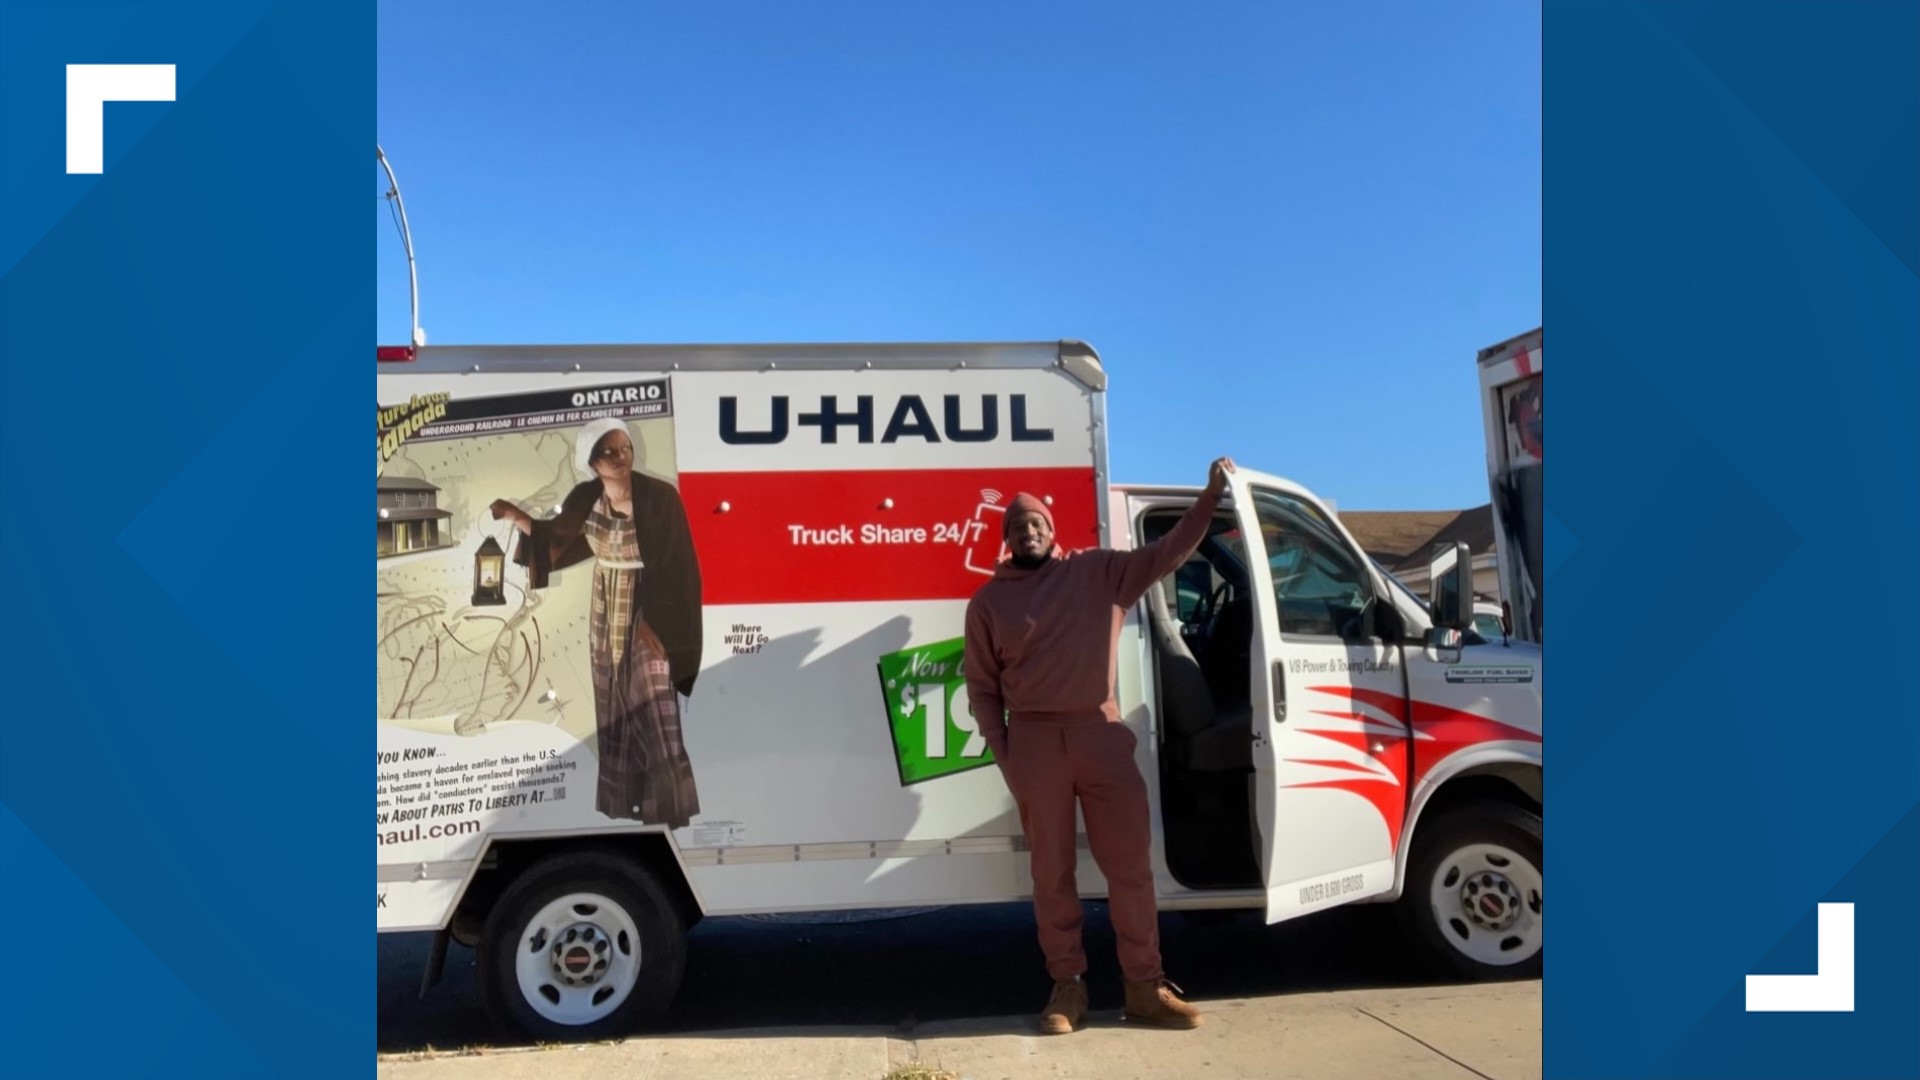 After one man's car rental company canceled at the last minute and facing surging prices, he opted to take a U-Haul van instead.